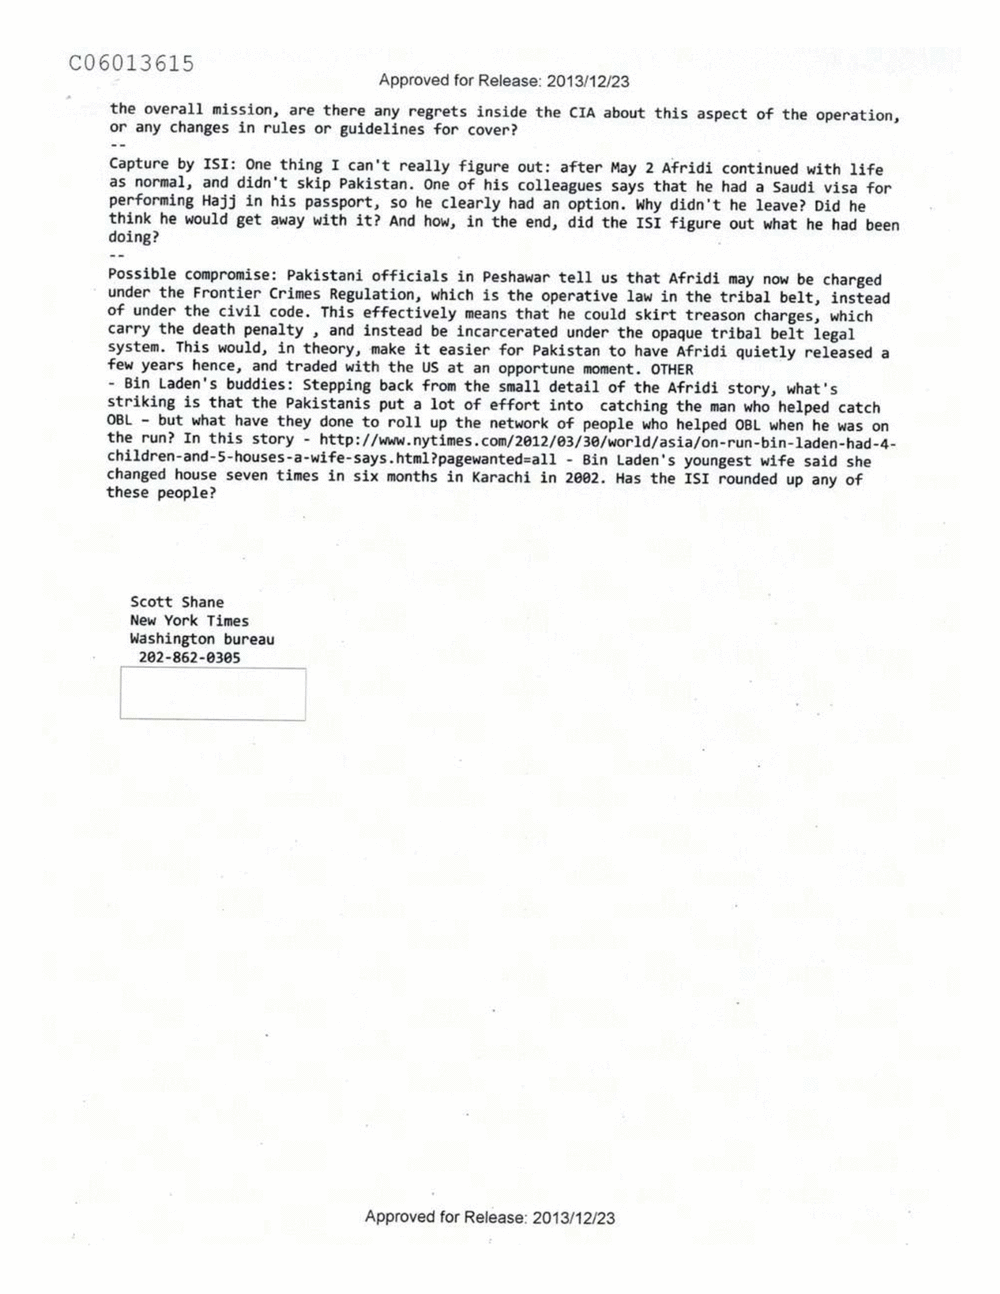 Page 440 from Email Correspondence Between Reporters and CIA Flacks